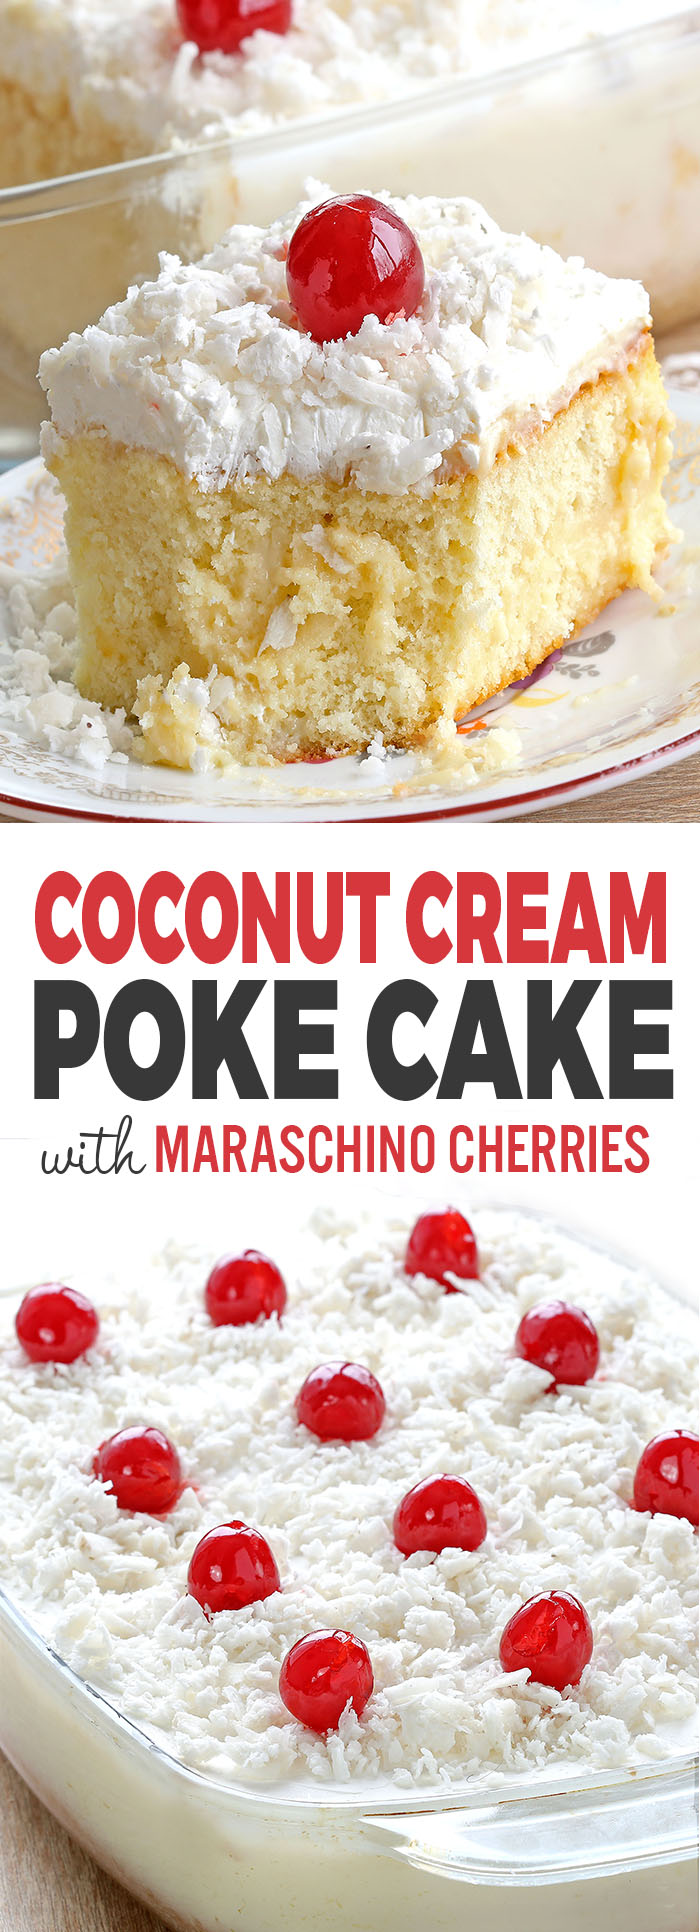 Fast, EASY, impressive, moist, and packed with big, BOLD coconut flavor!! Literally though, this coconut cream poke cake is the best.